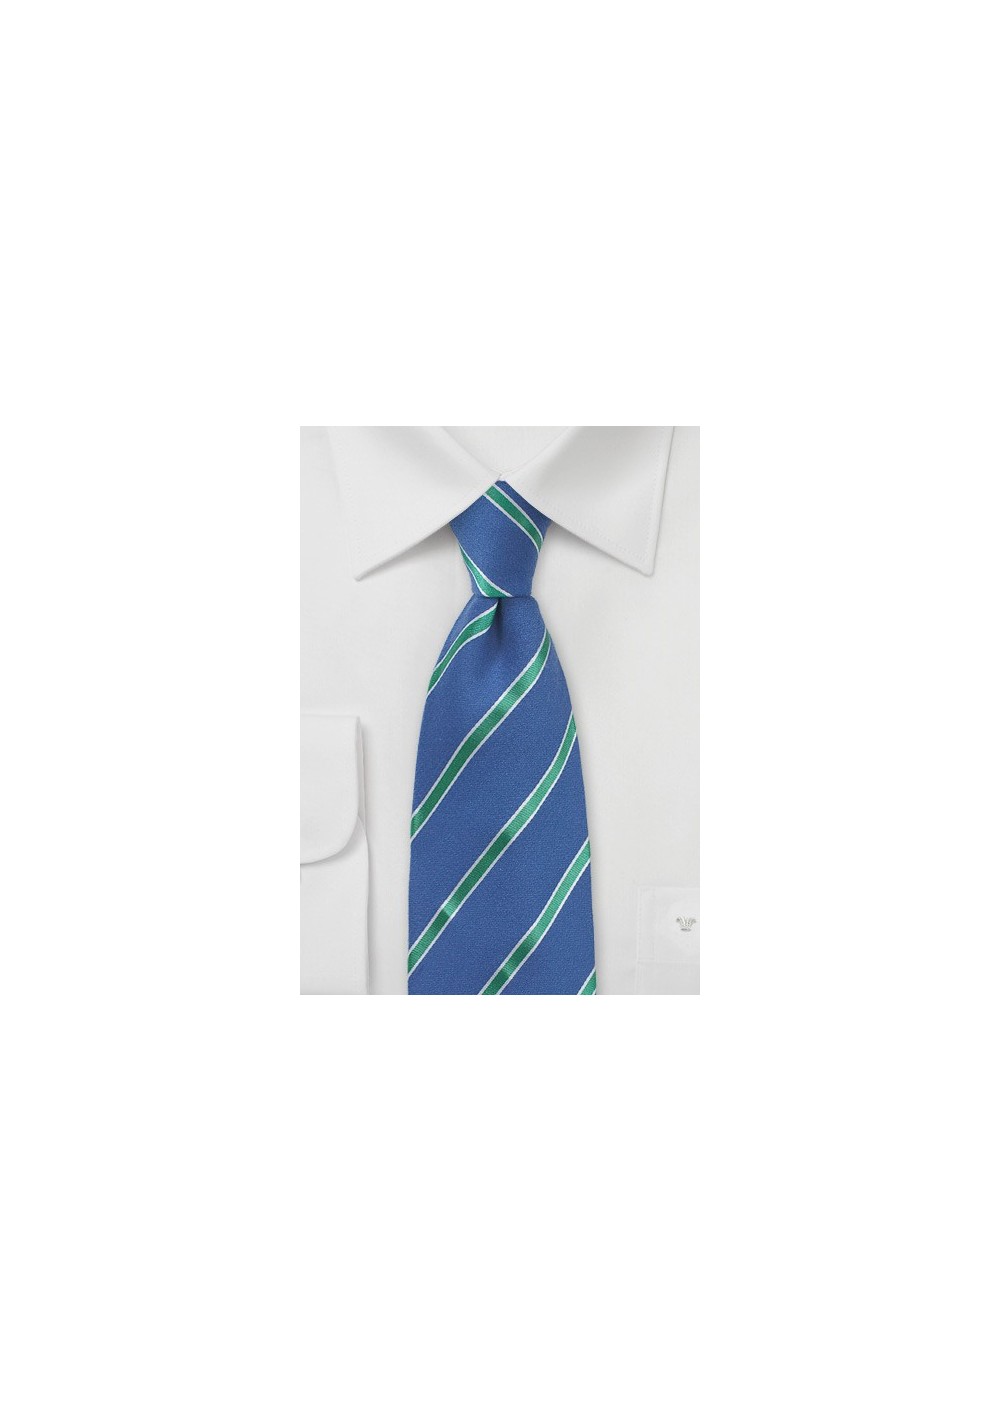 Blue Summer Tie with Mint Green Stripes